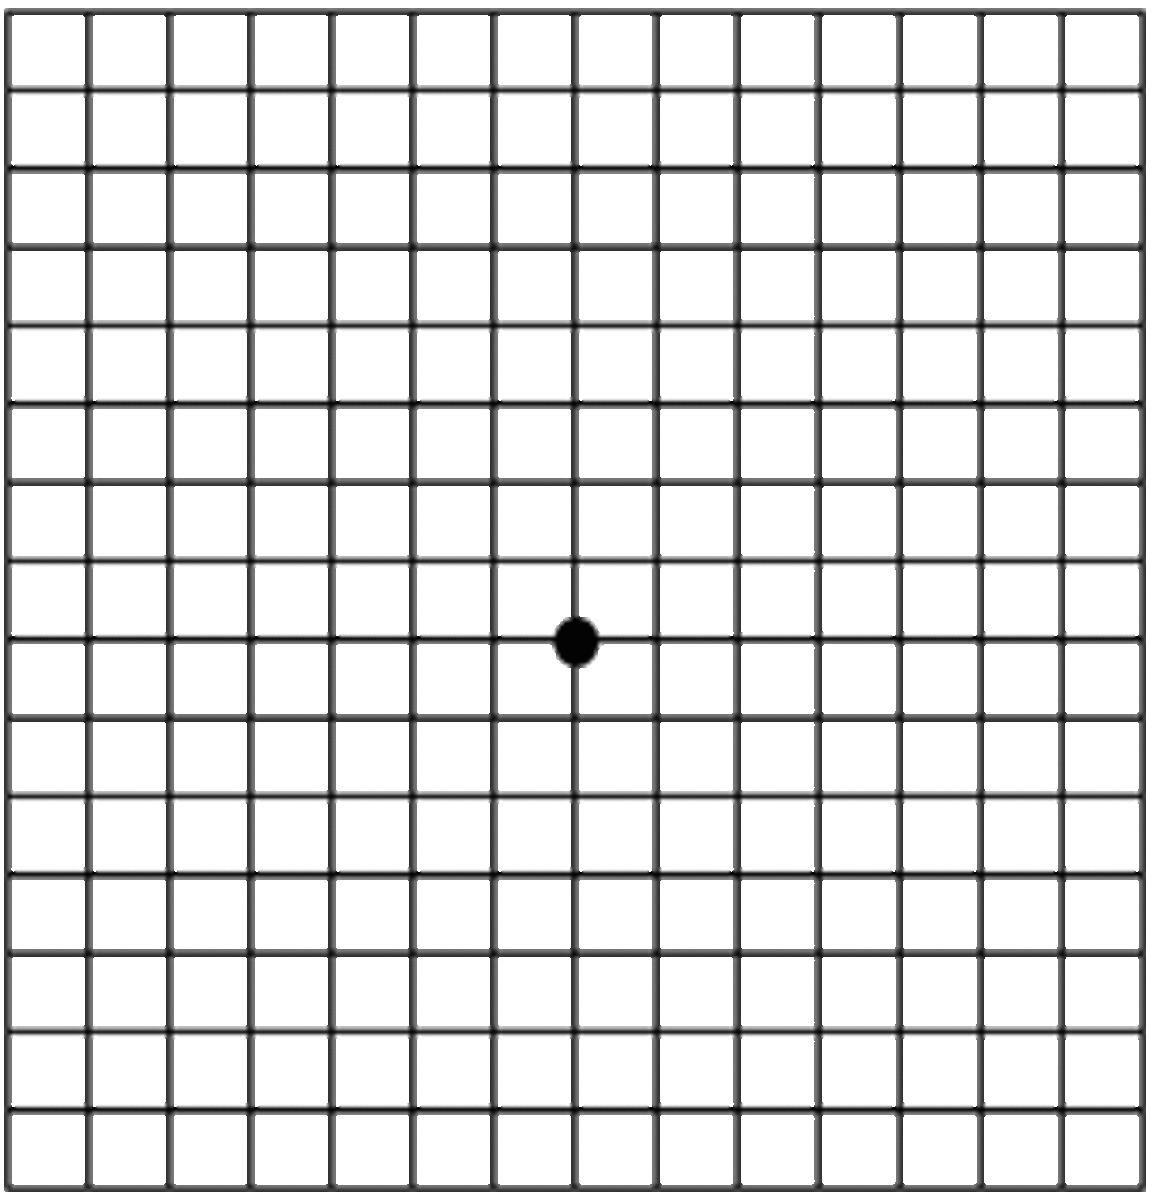 Save Your Vision With the Amsler Grid